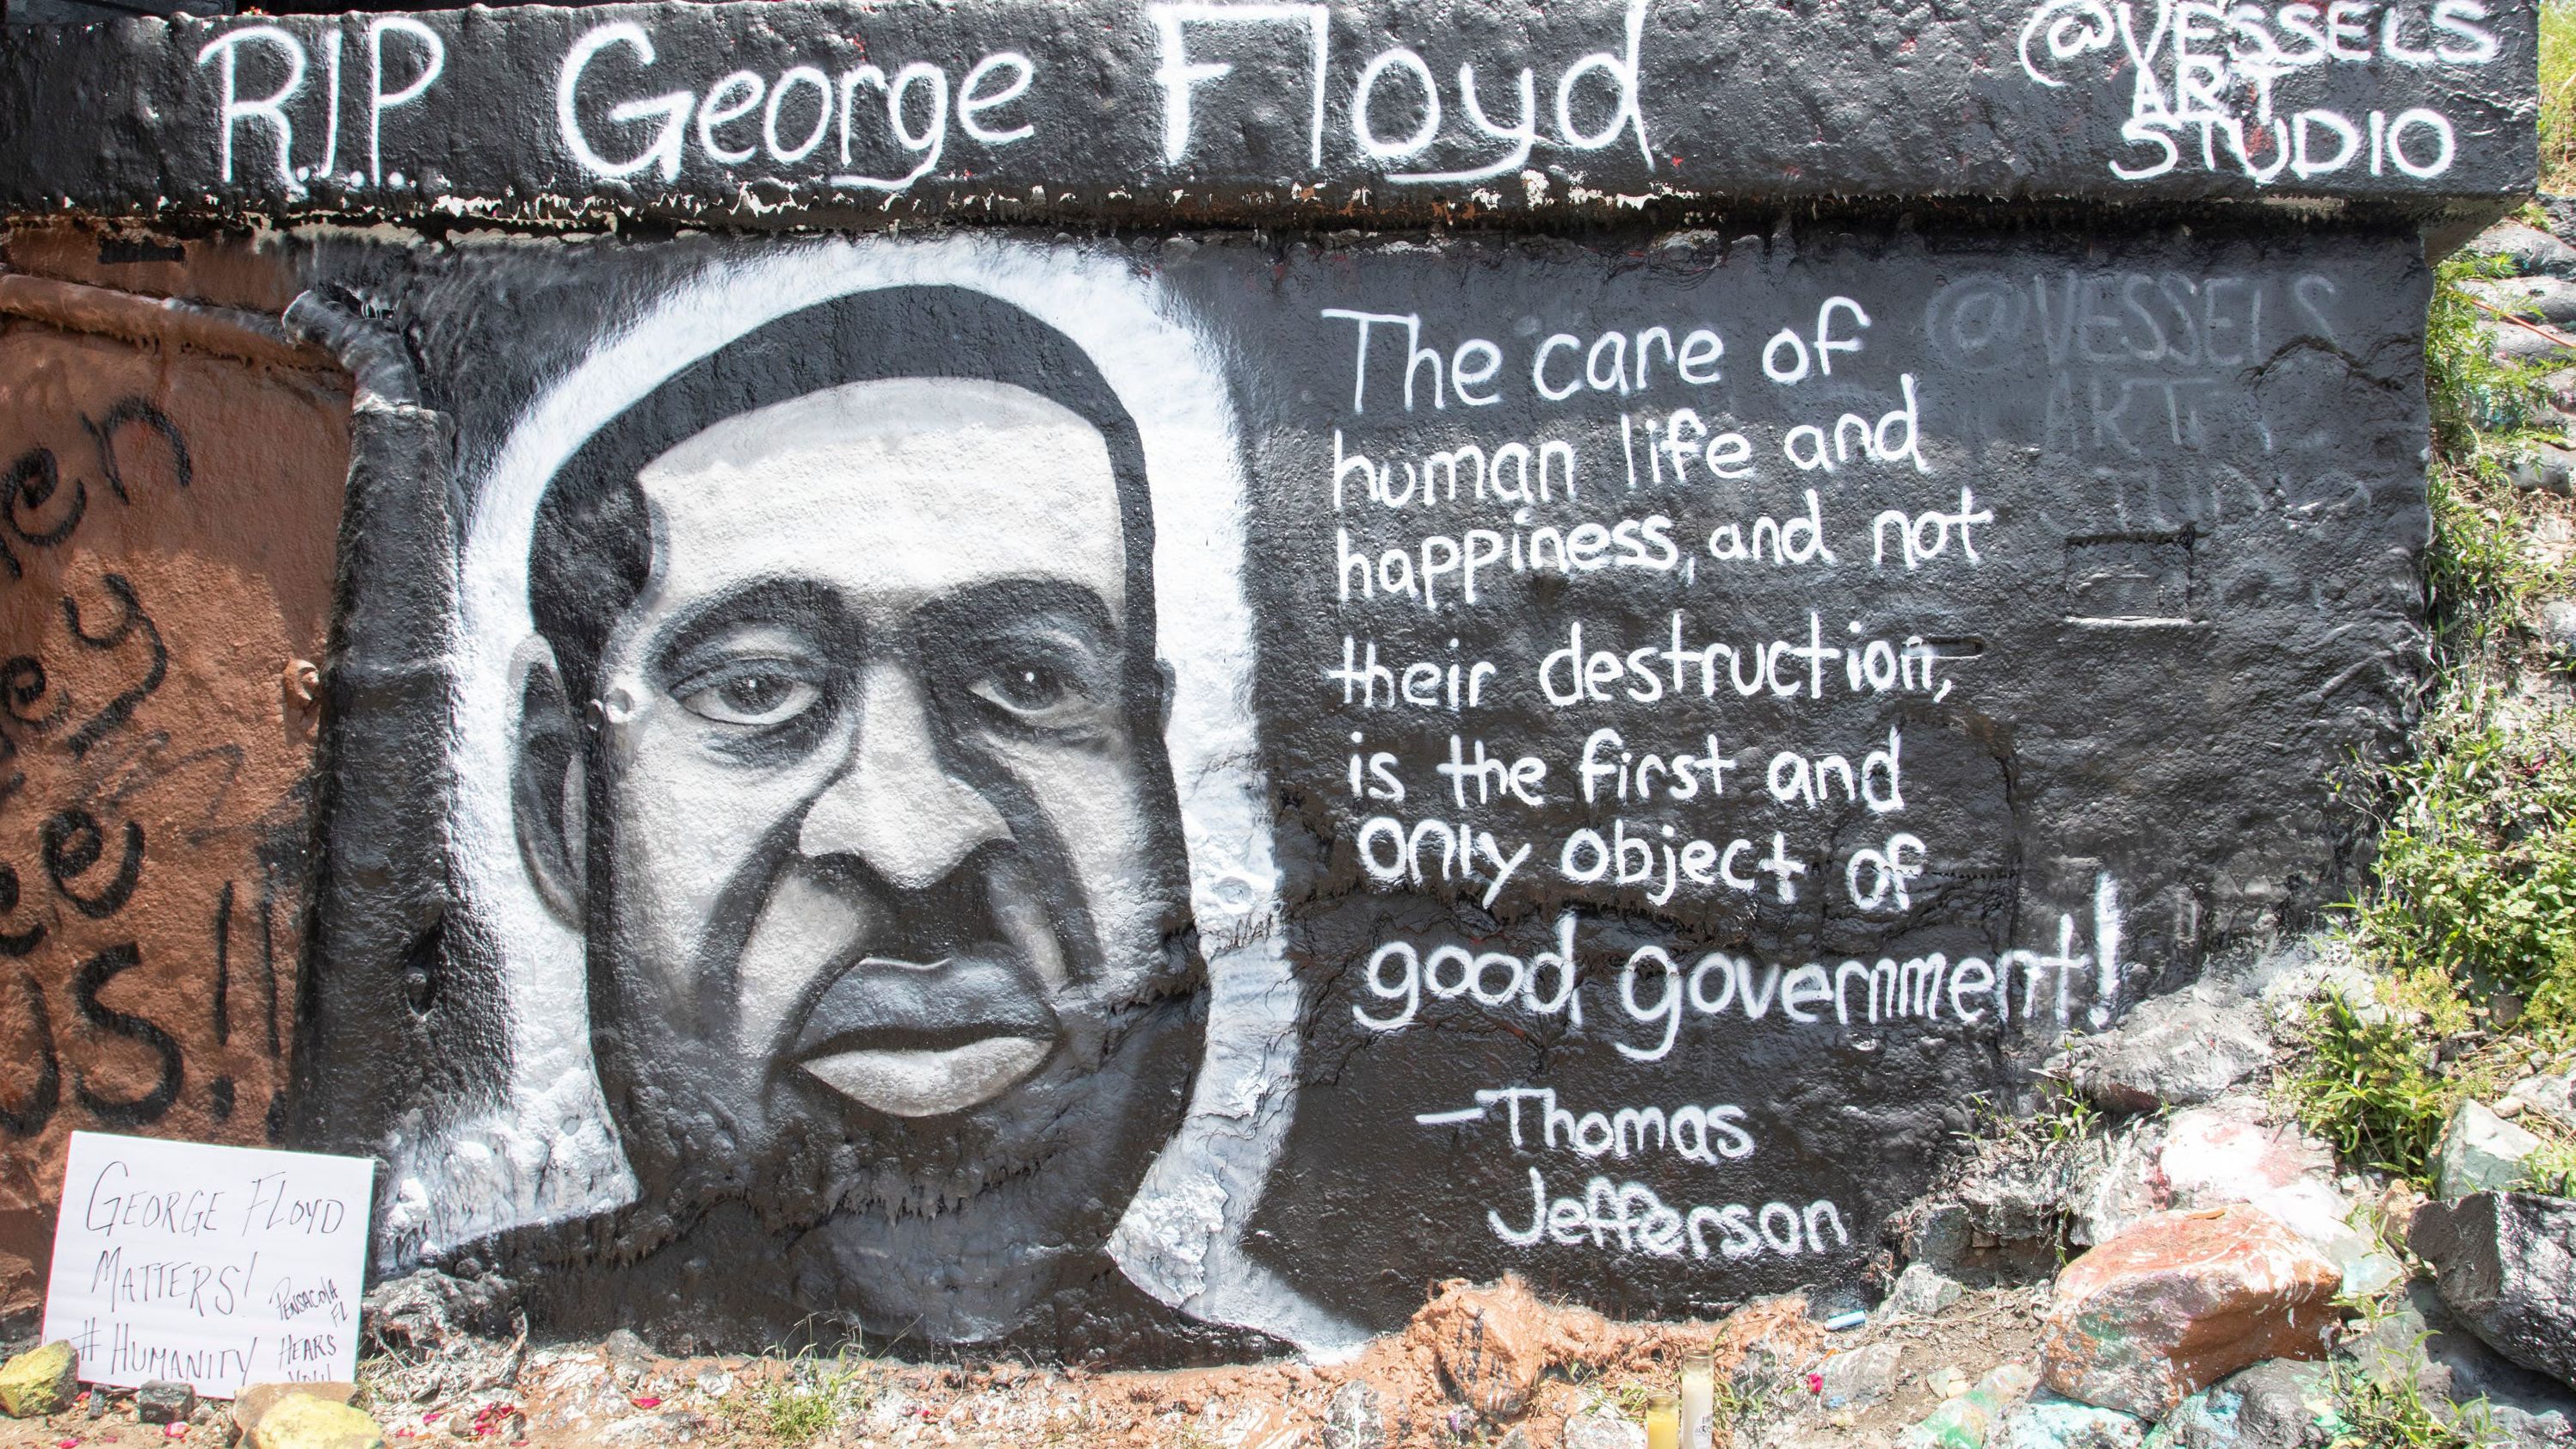 A Thomas Jefferson quote is seen on this mural, painted by Brandon Vessels in Pensacola, Florida.